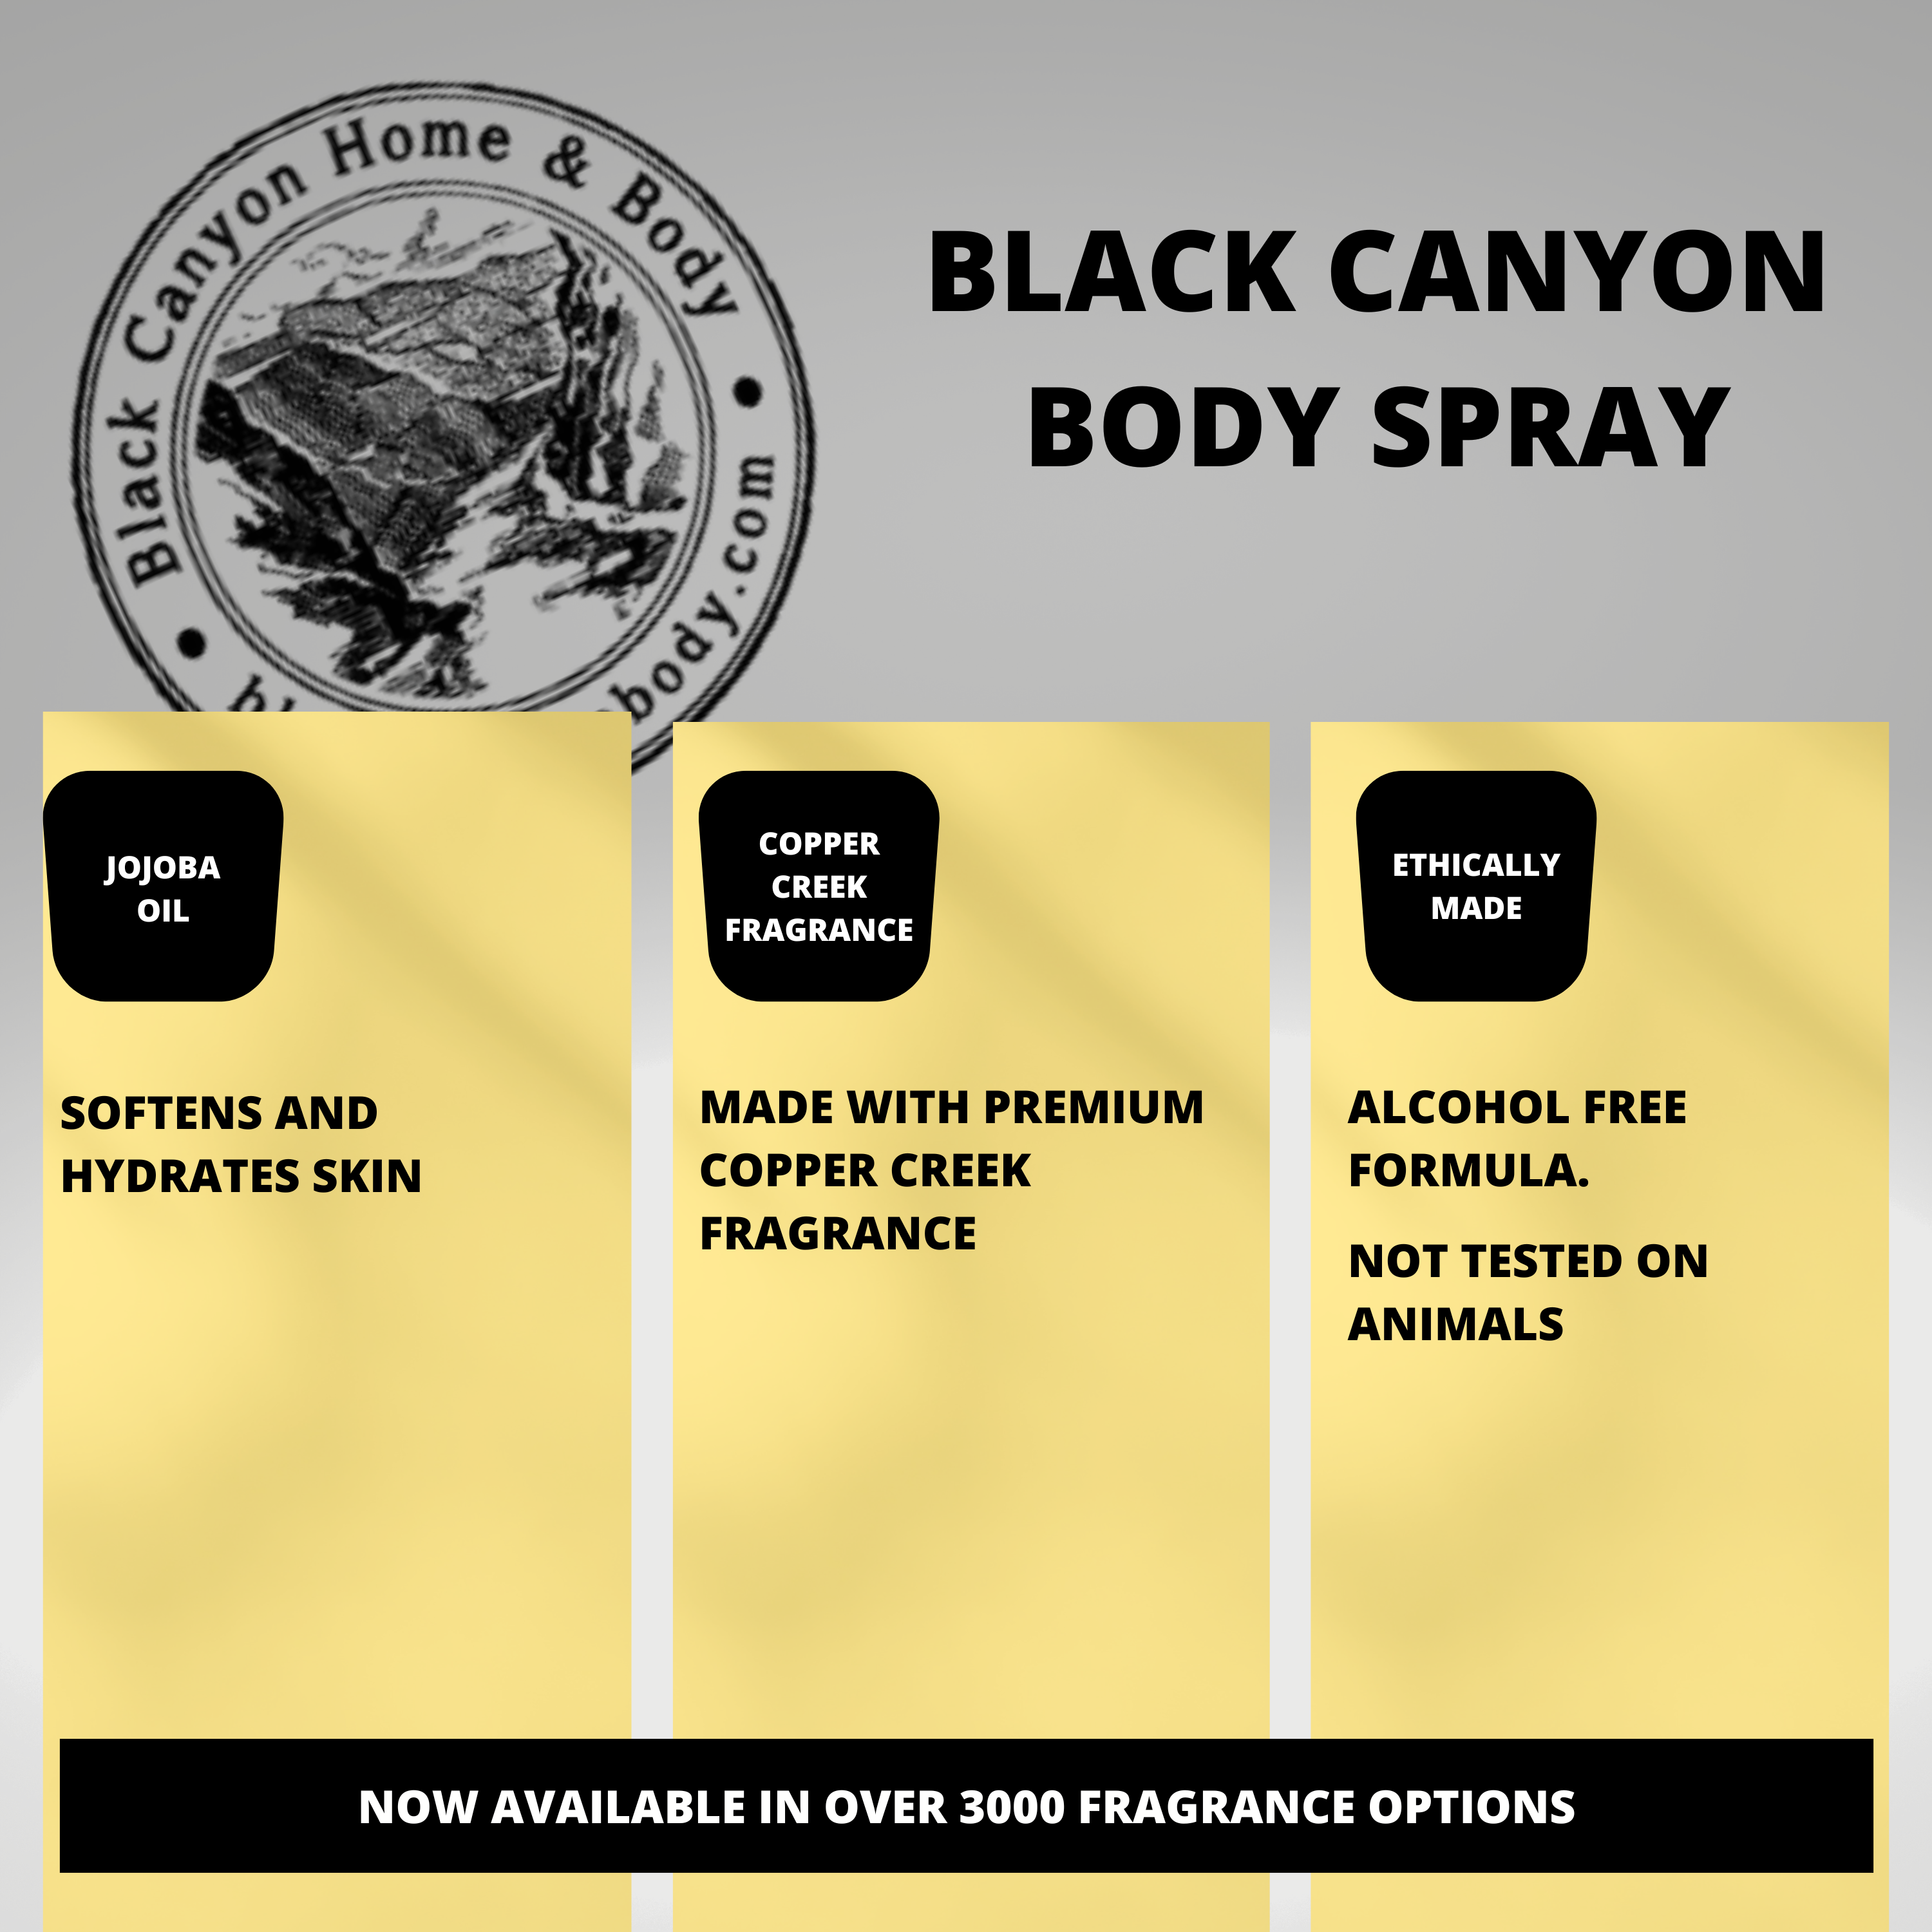 Black Canyon Witches Broom Scented Body Spray